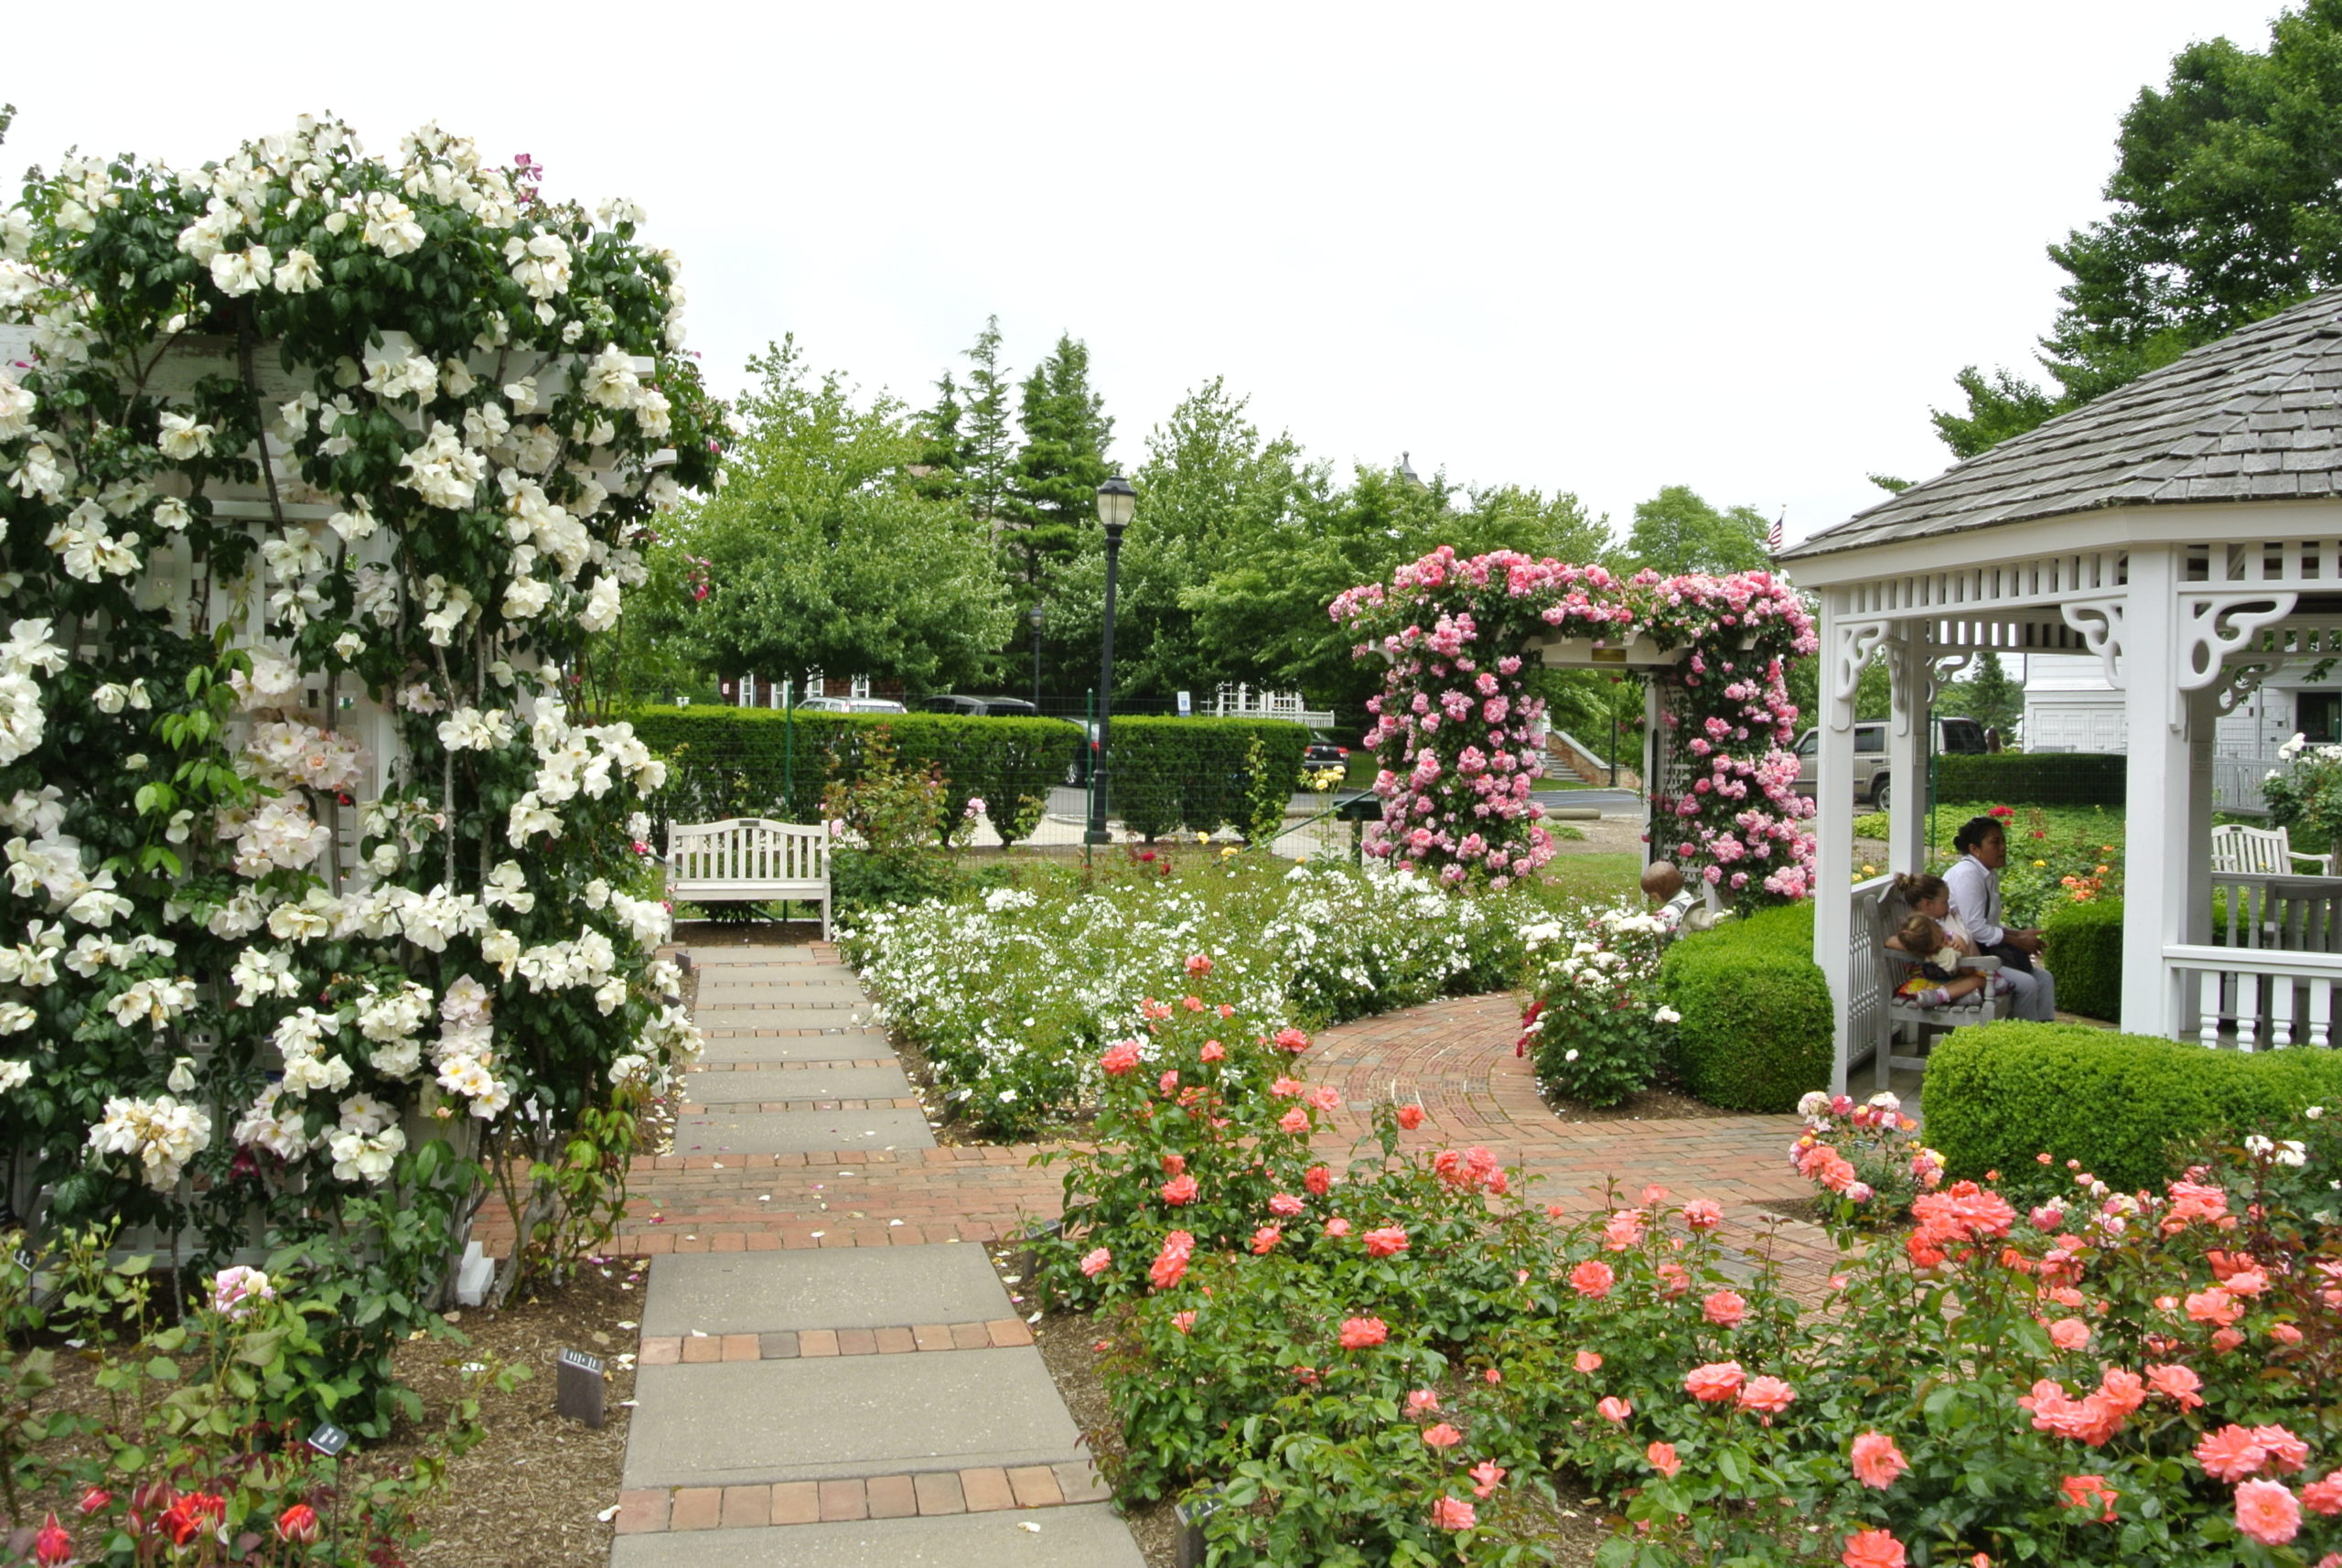 The rose garden at the Rogers Memorial Library.  DANA SHAW